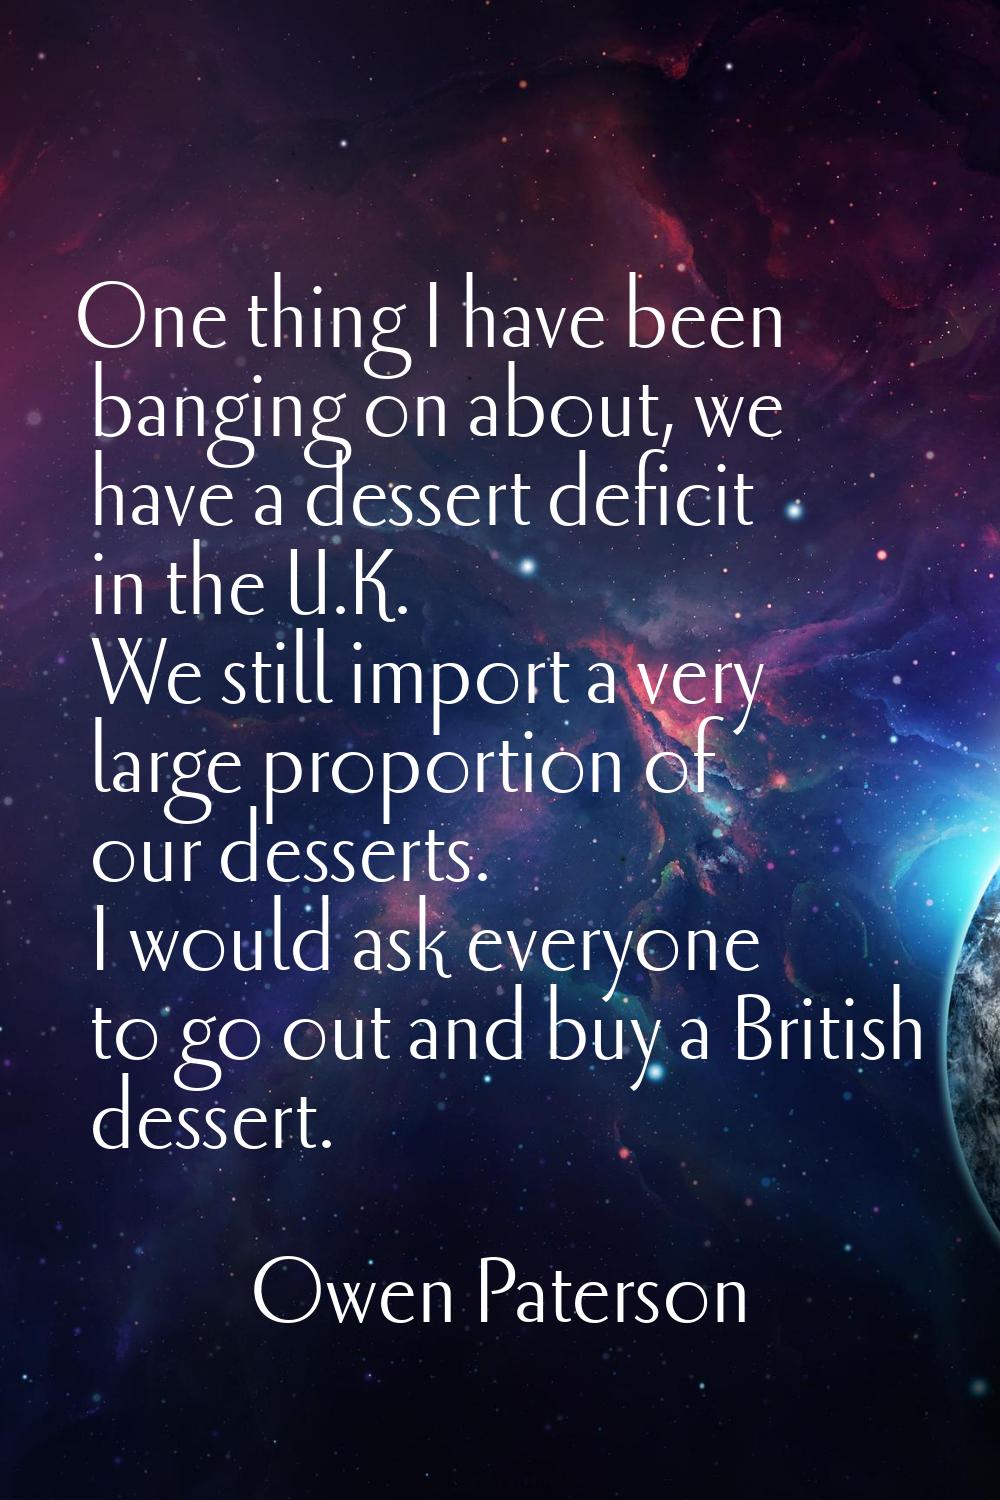 One thing I have been banging on about, we have a dessert deficit in the U.K. We still import a ver